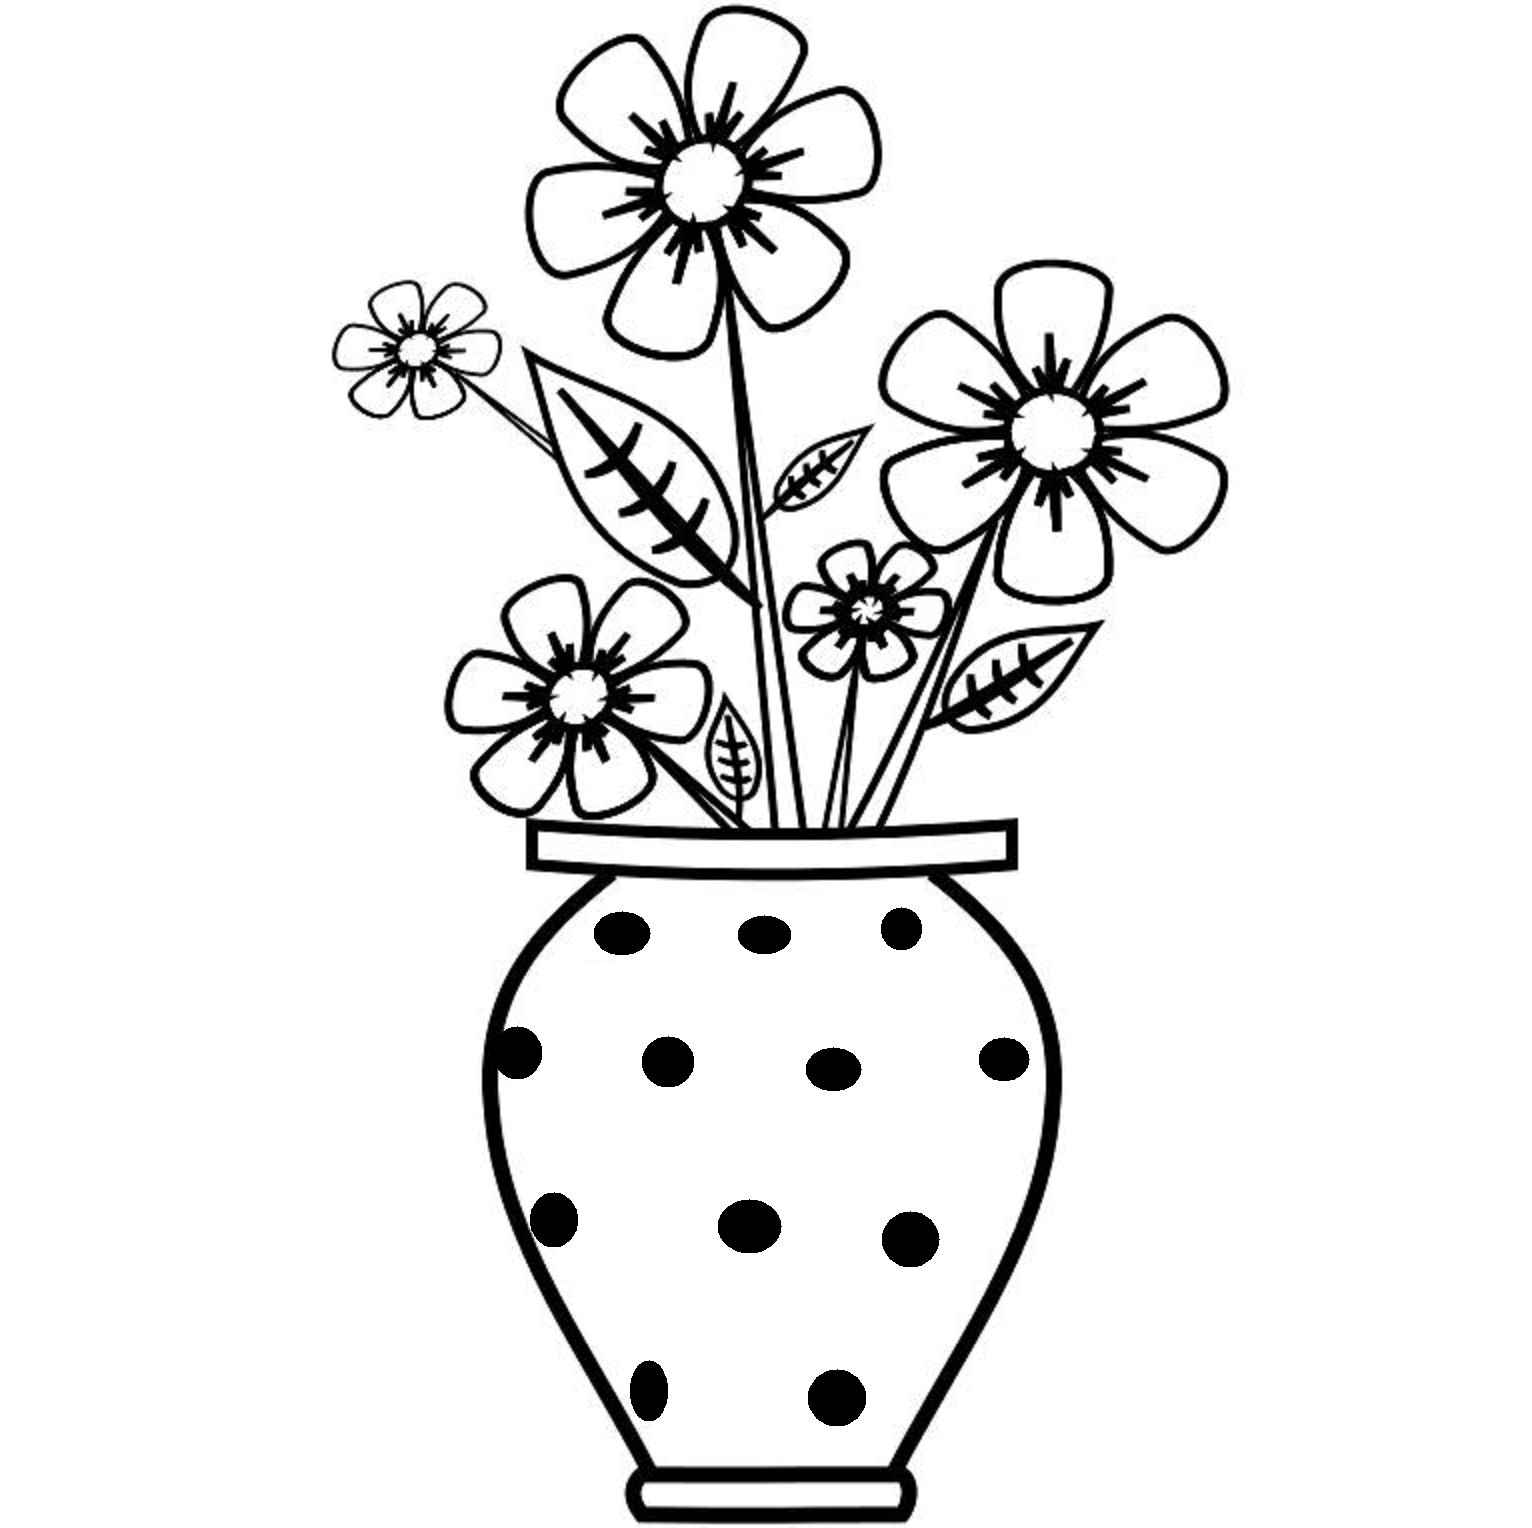 Flower Pot Line Drawing | Free download on ClipArtMag